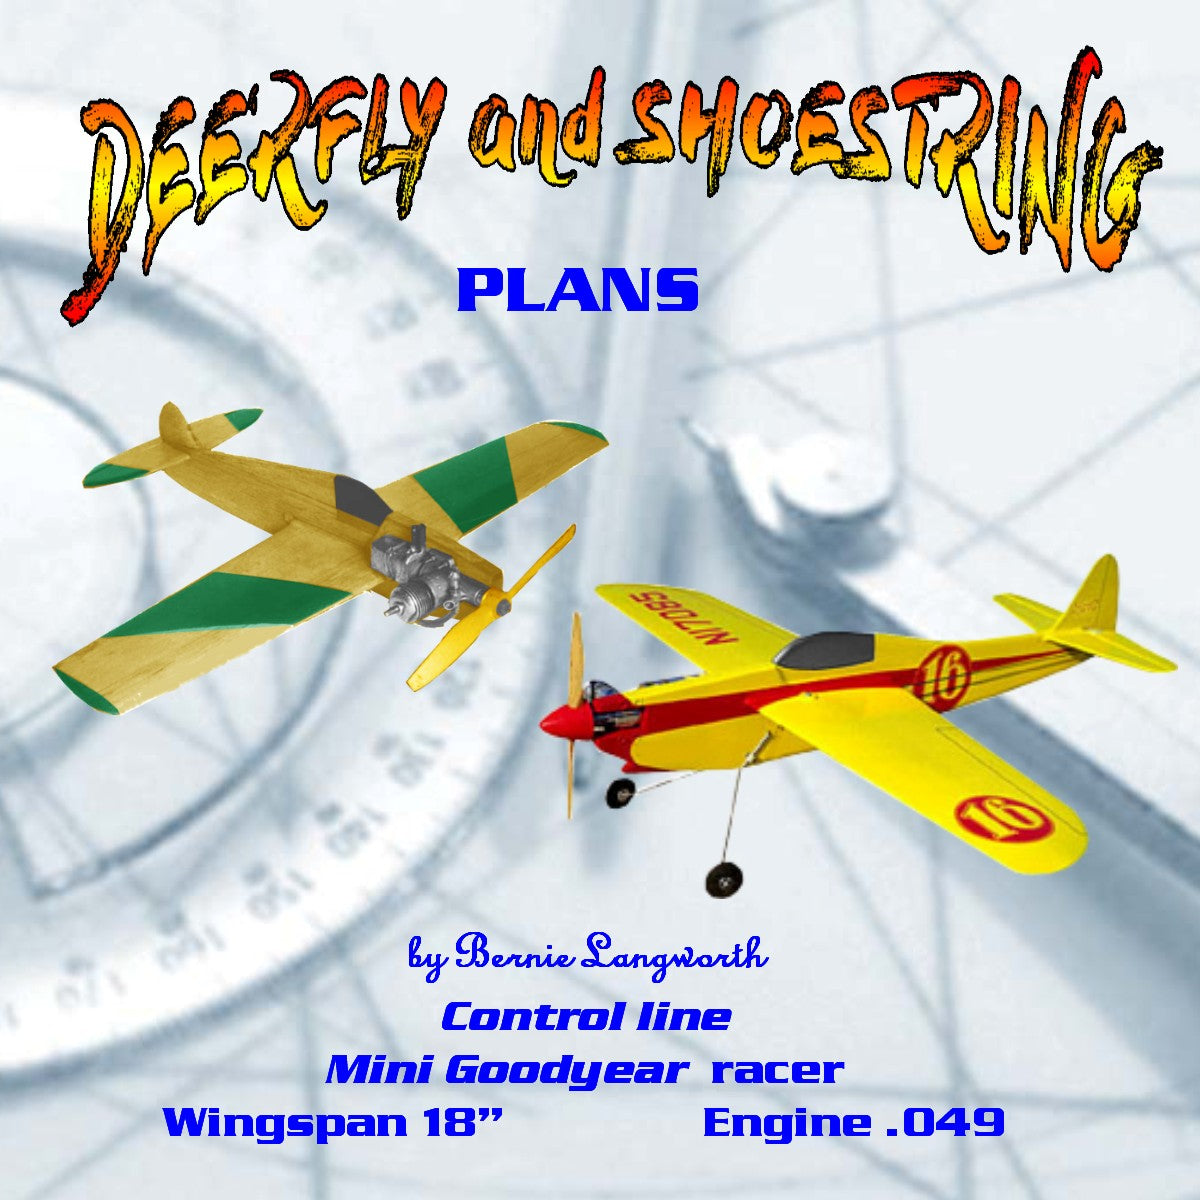 full size printed plan mini-goodyear class racers 1/2a to .09 "deerfly and shoestring"